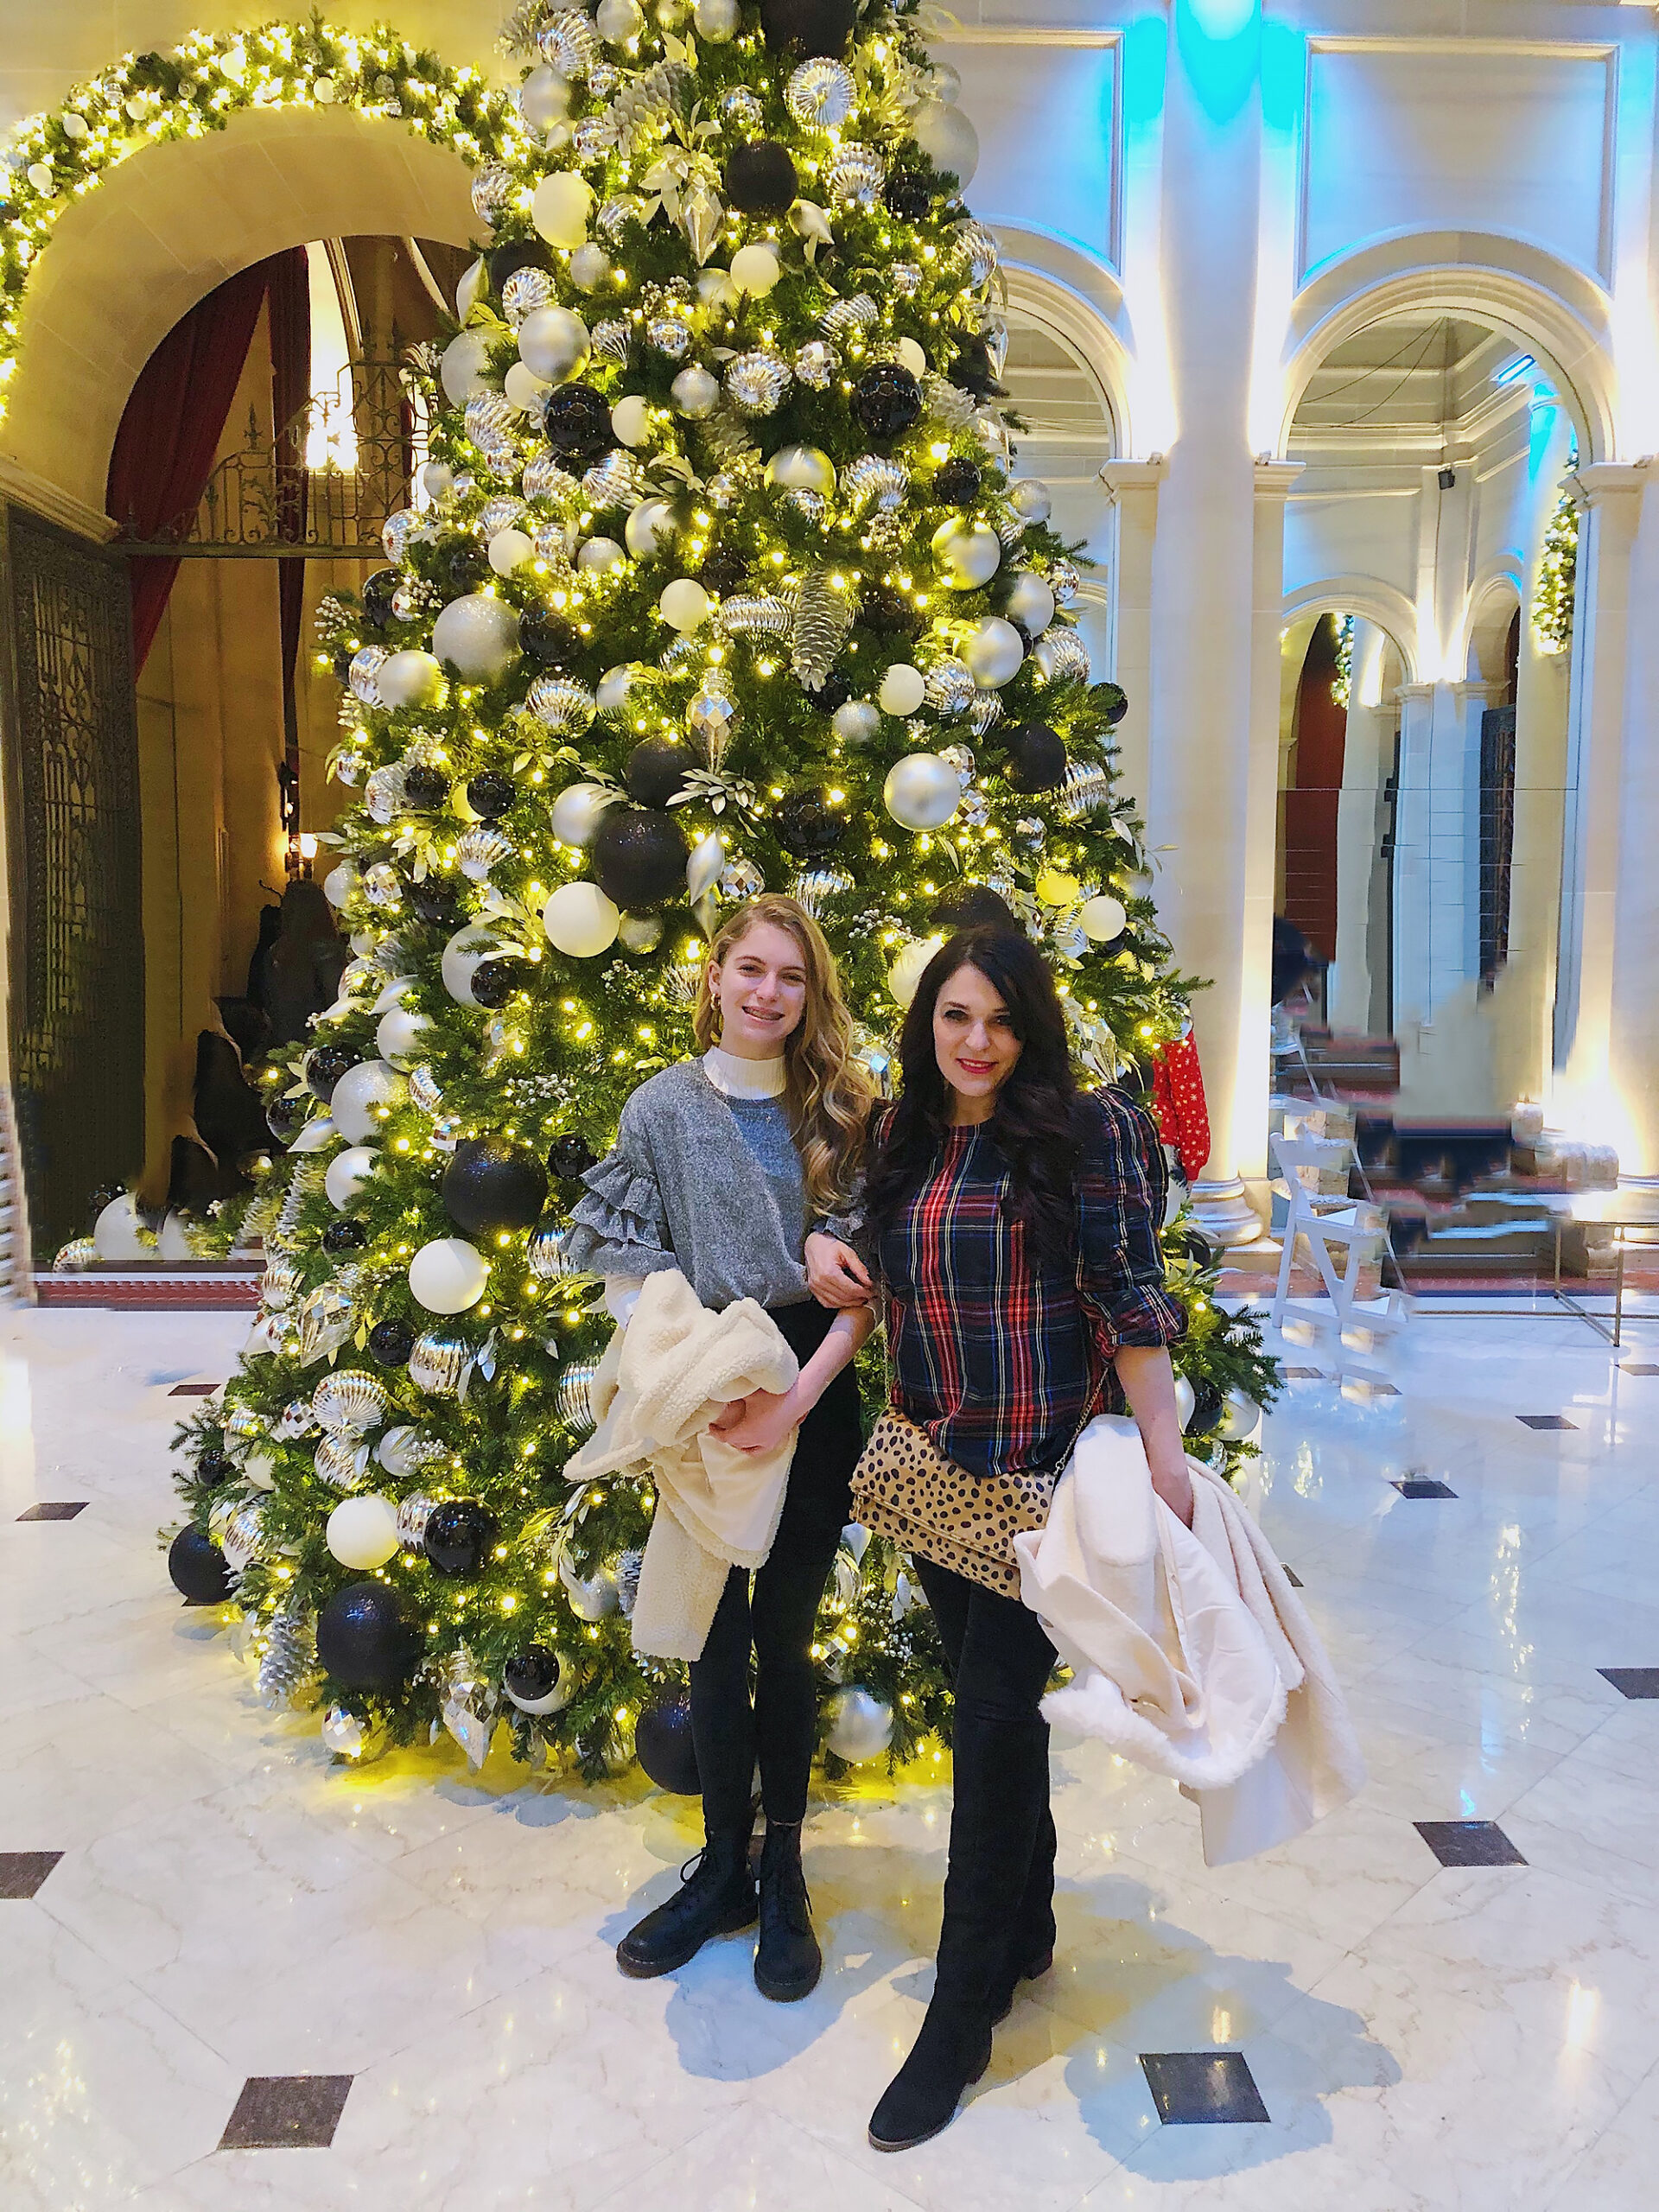 New York City Ballet--Our Favorite Things to Do in New York City that will make your trip memorable, festive and of course magical! Red wreaths on doors and windows Darling Darleen Top Lifestyle blogger